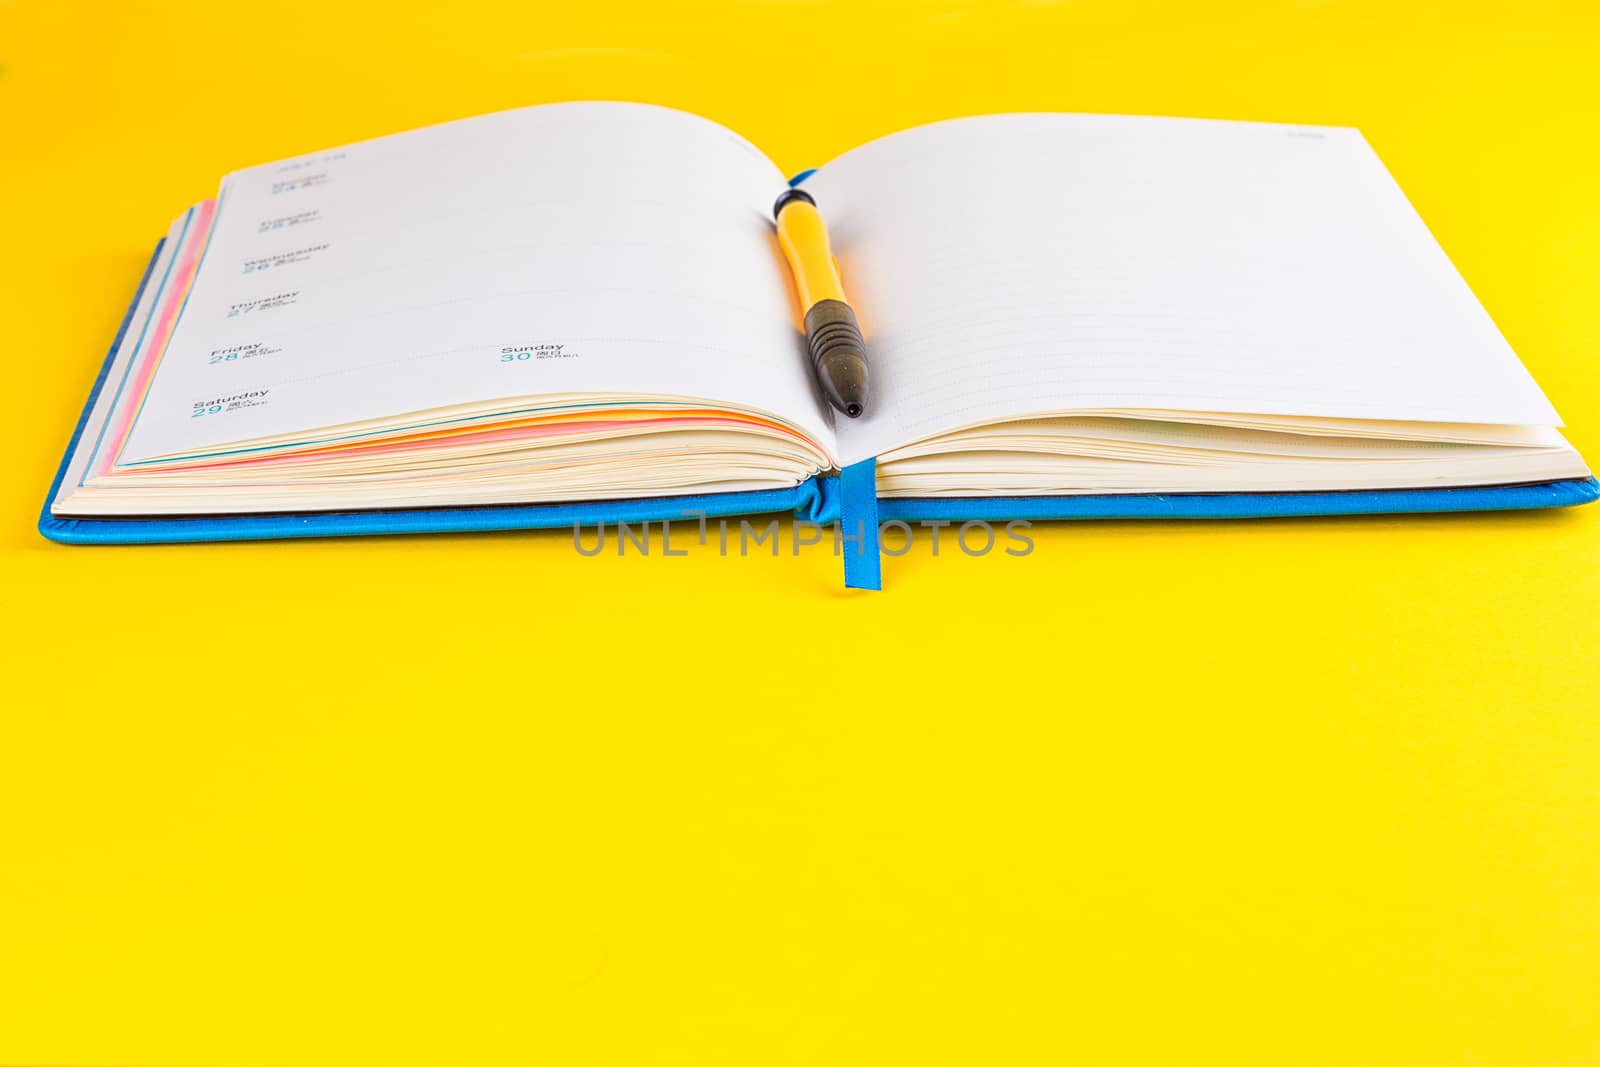 Open diary and pen on a yellow background